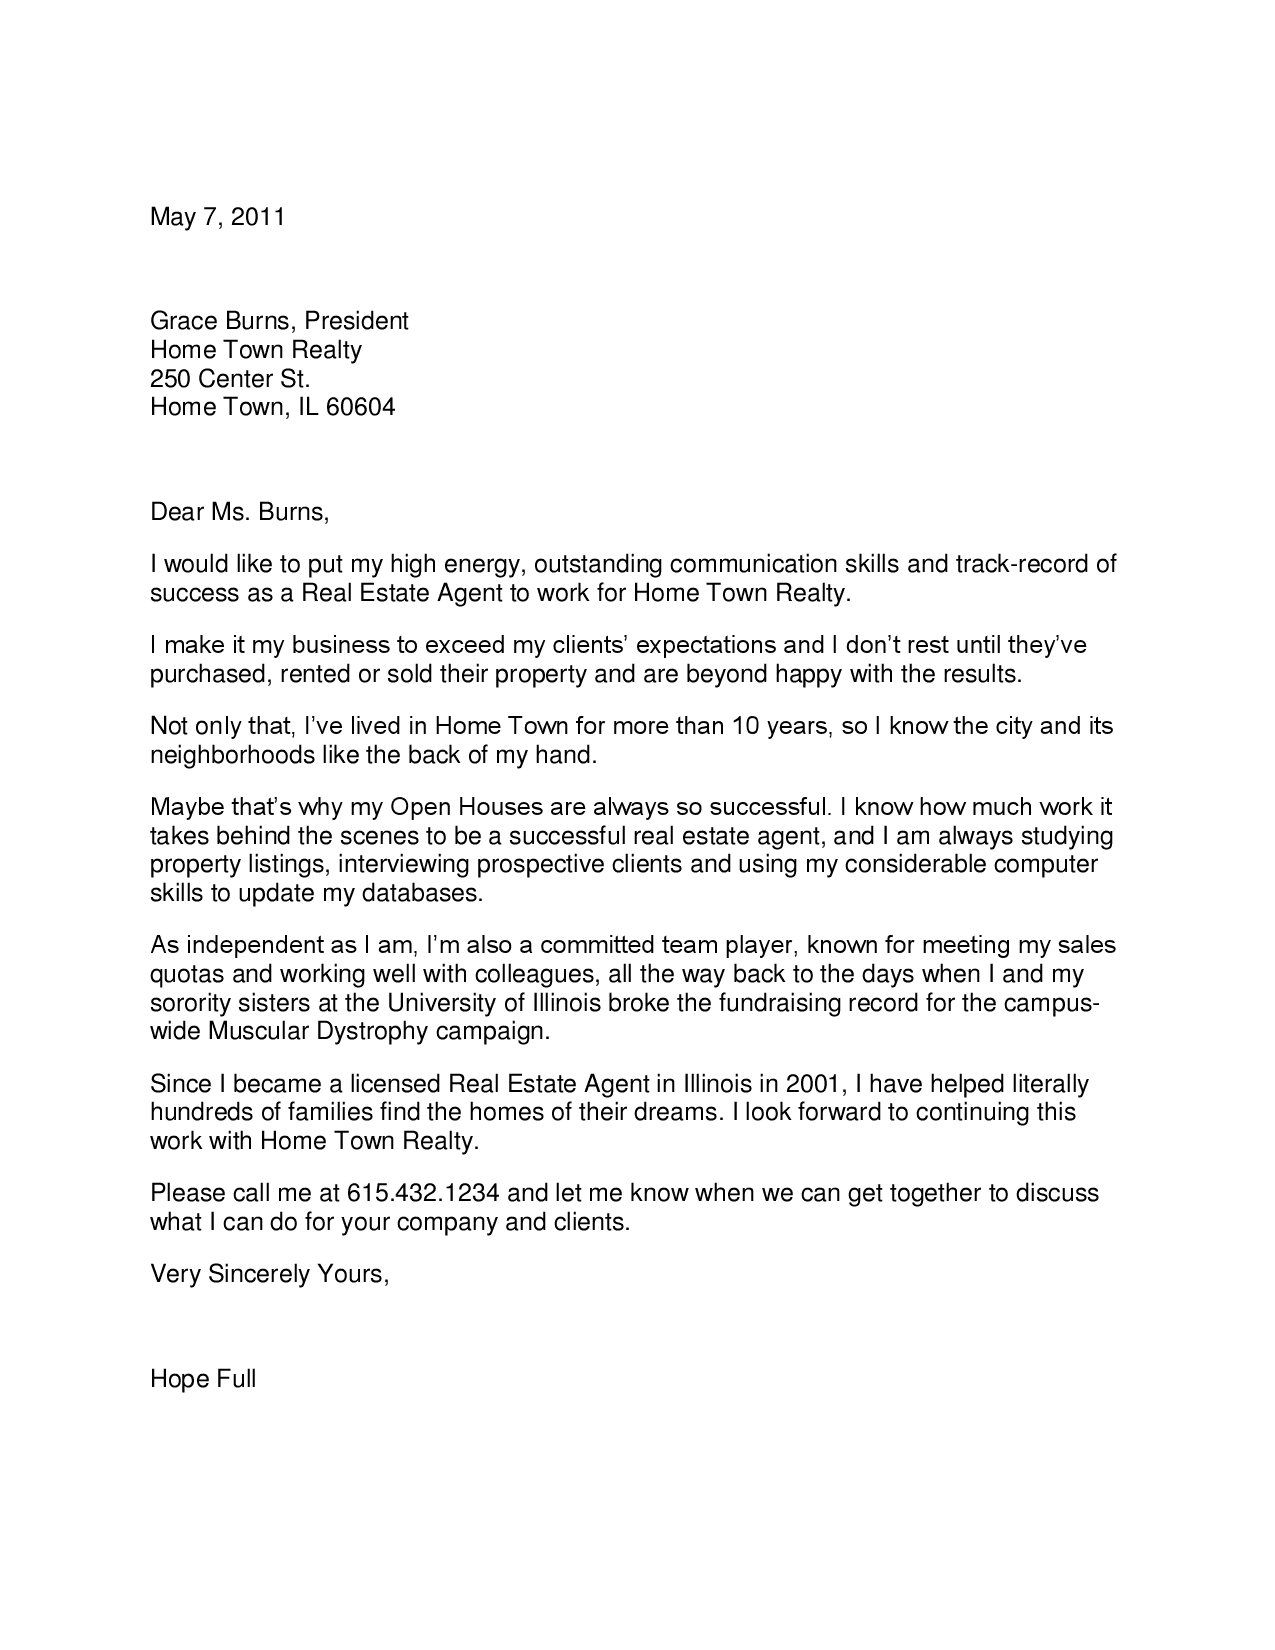 sample cover letter for real estate agent with no experience